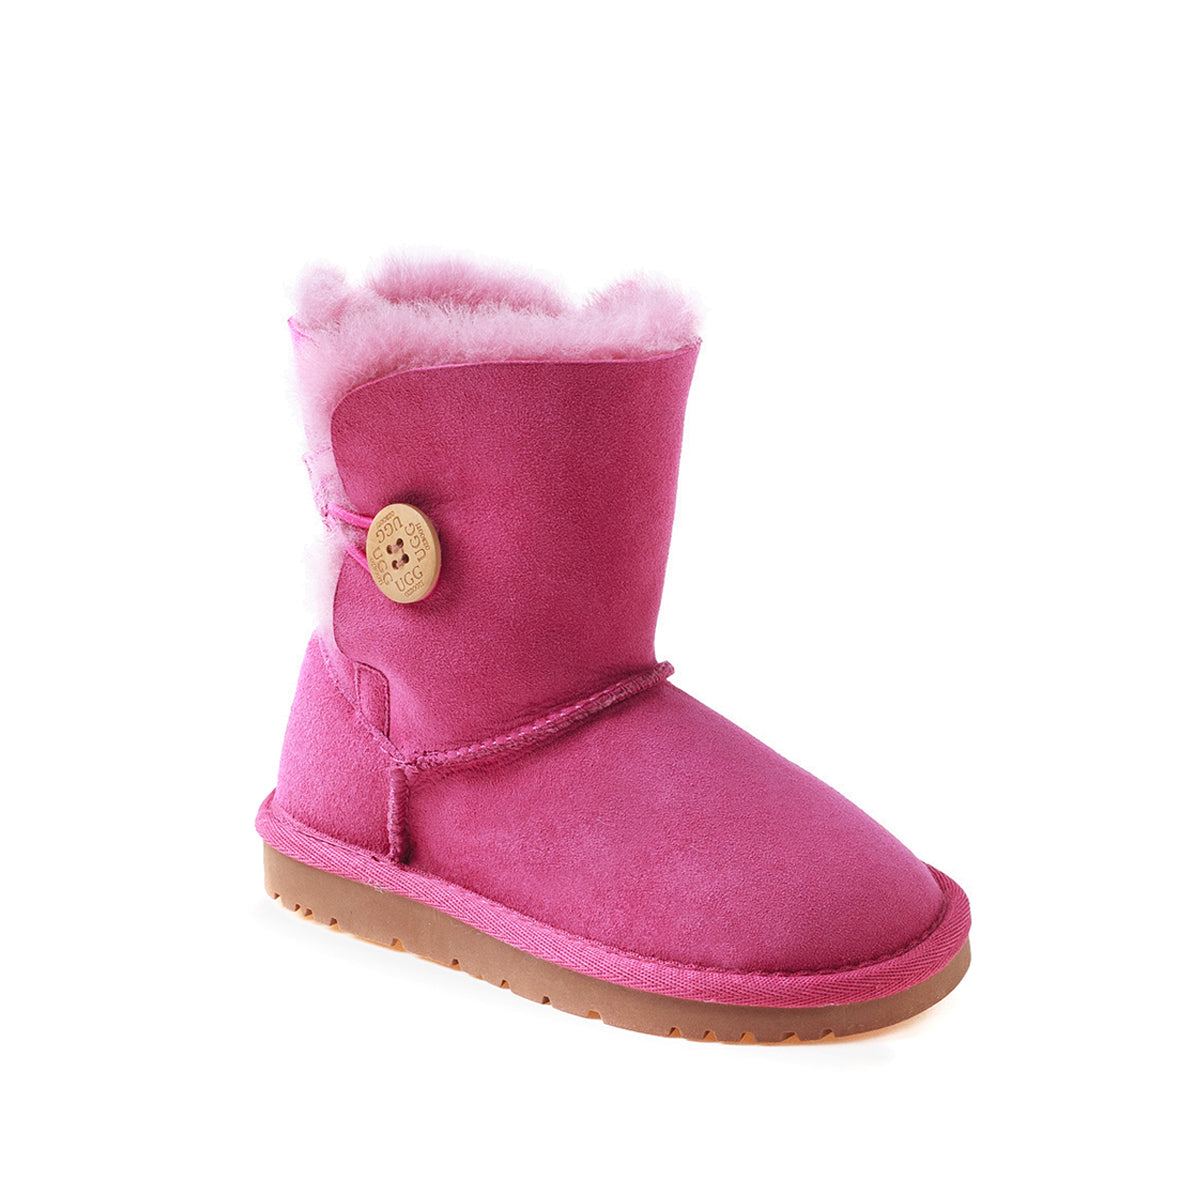 Ugg Kids Ugg Button Boots (Water Resistant)-Kid Boots-PEROZ Accessories